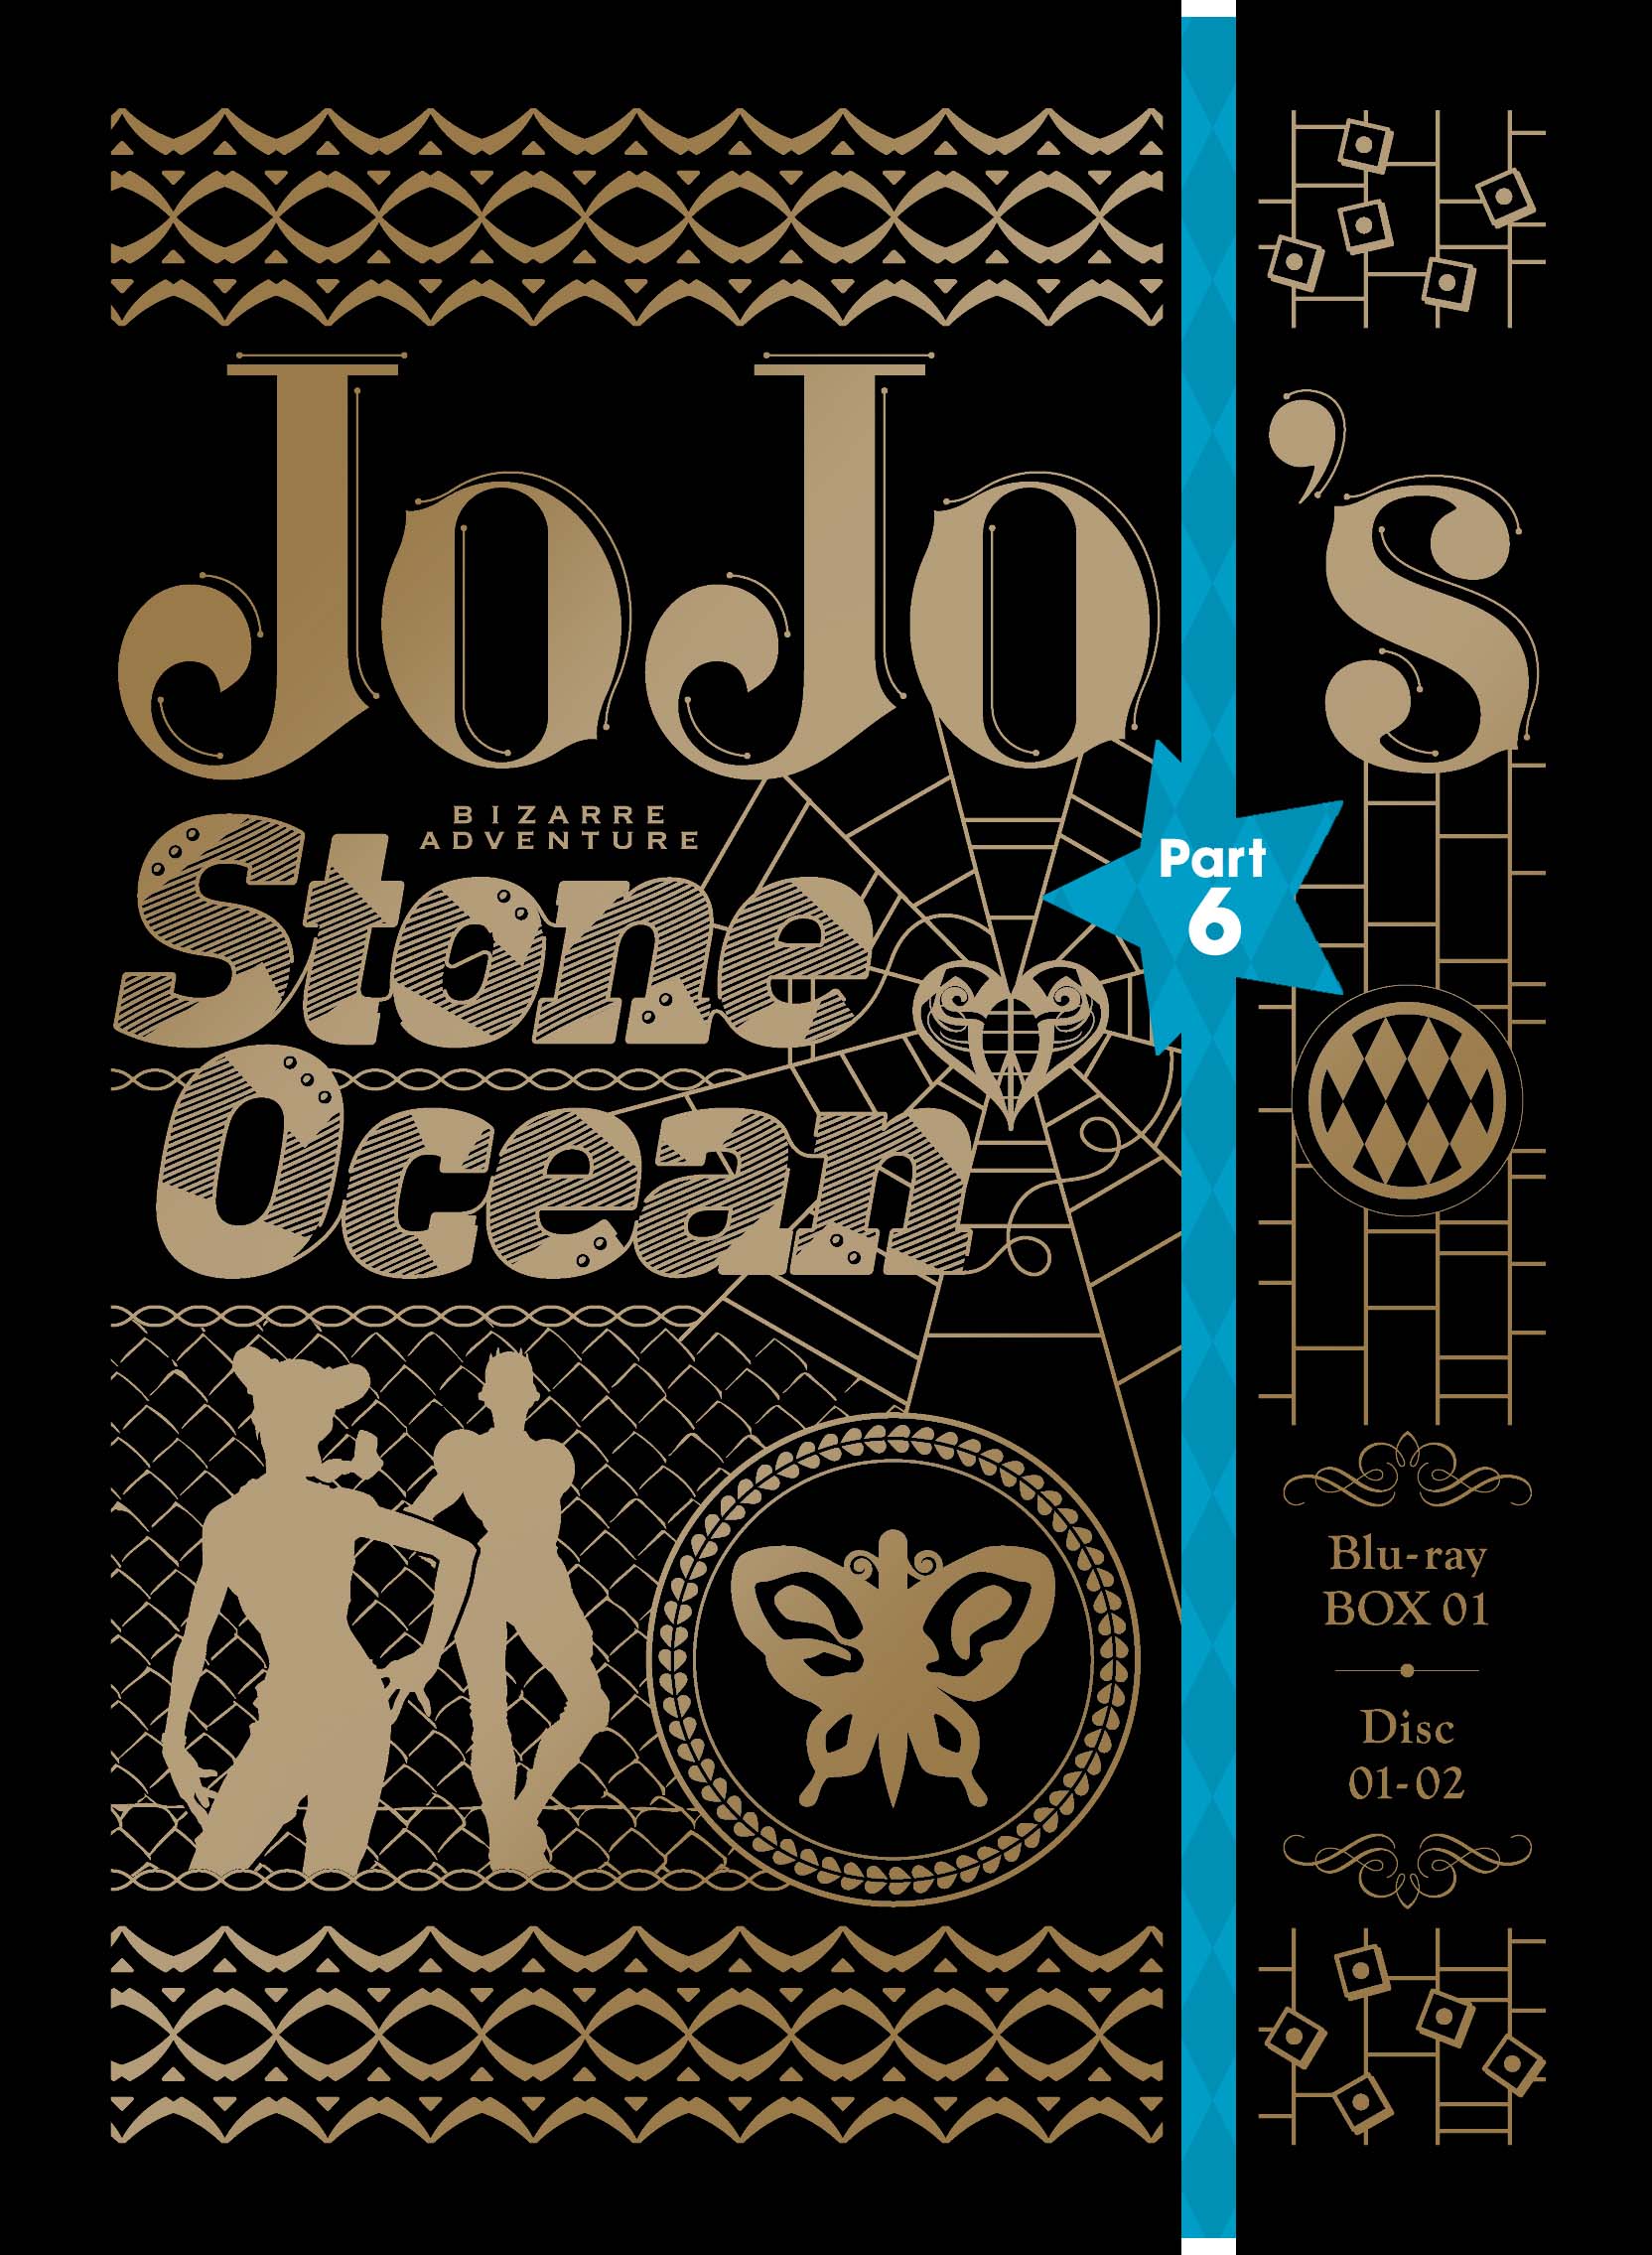 Three Stone Ocean Anime Blu-Ray Box Sets Will Be Released